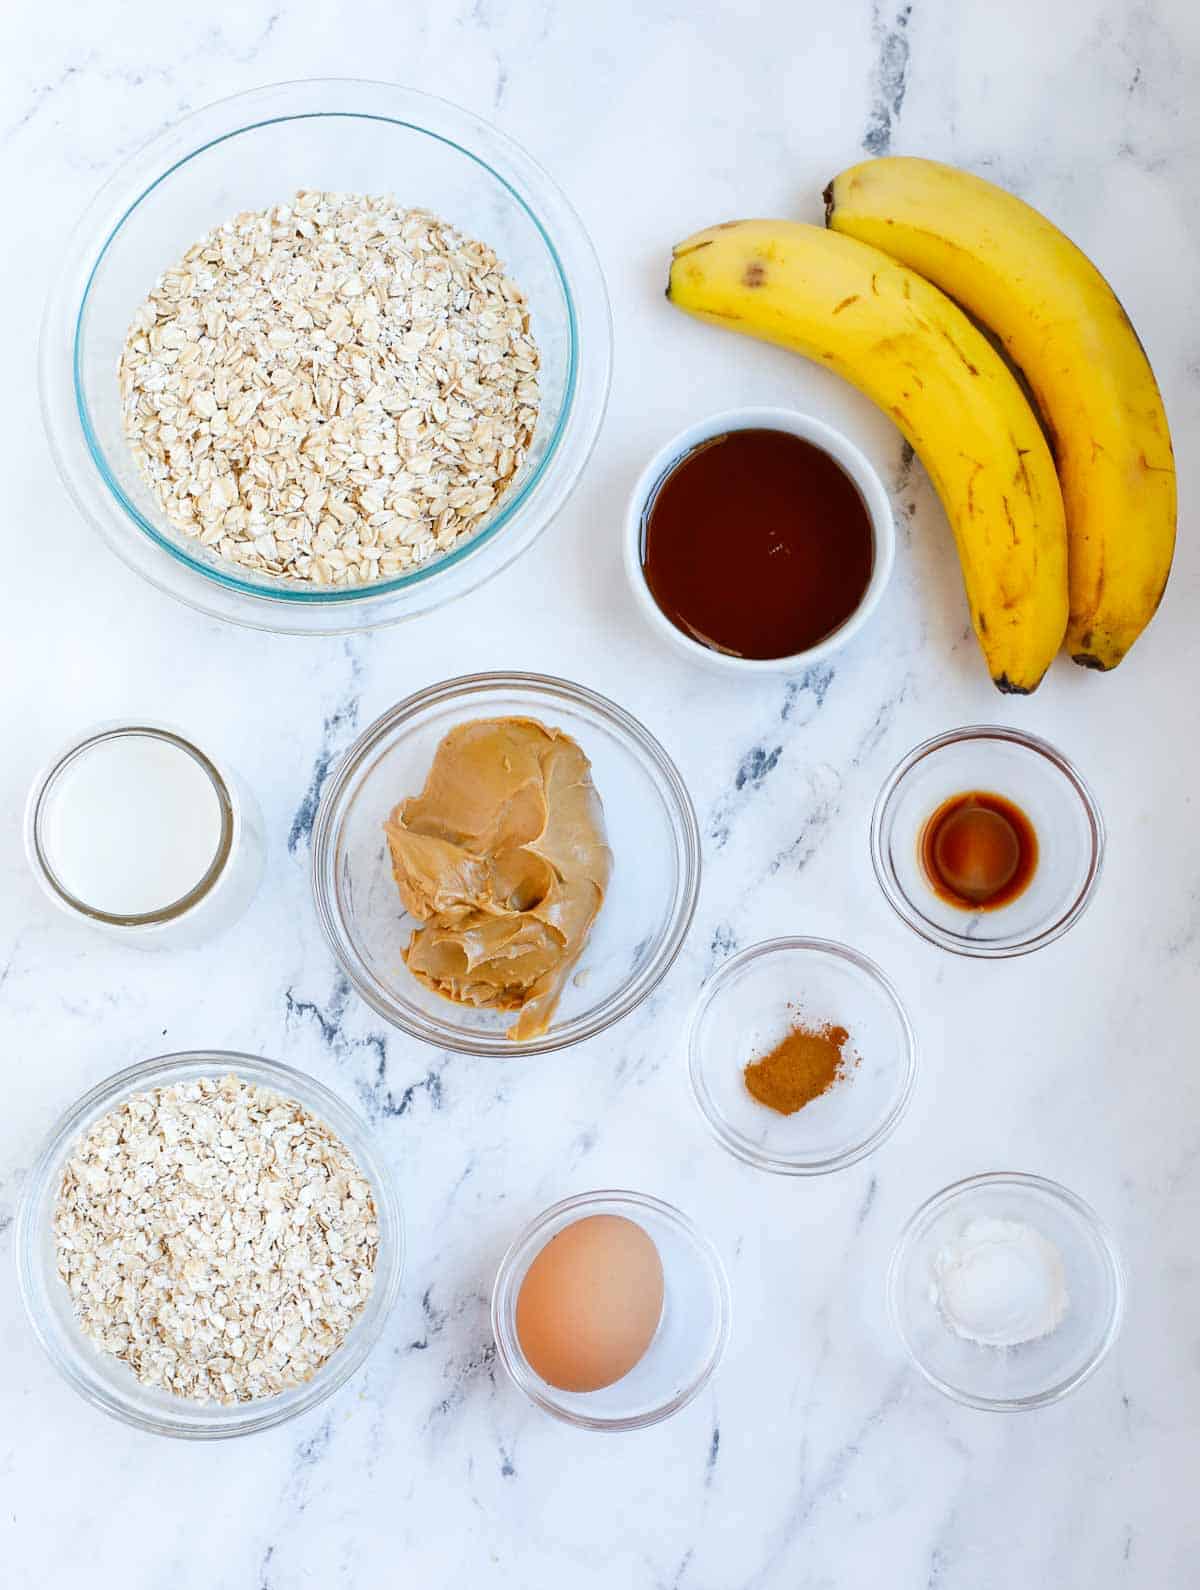 Ingredients needed to make Peanut Butter Banana Baked Oats.